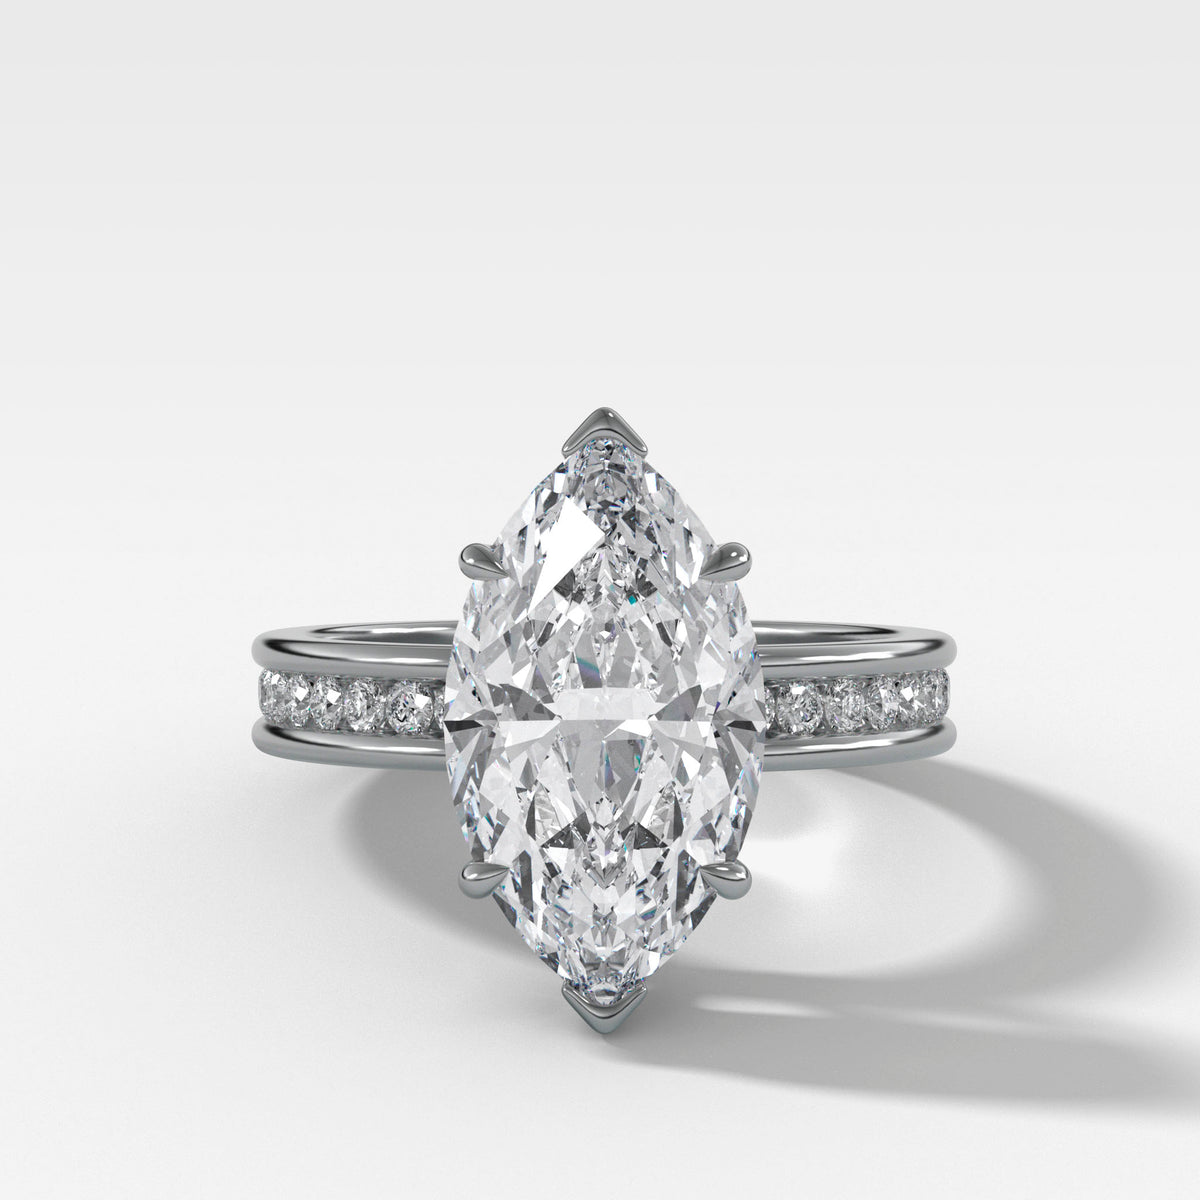 Petite Channel Set Engagement Ring with Marquise Cut Diamond